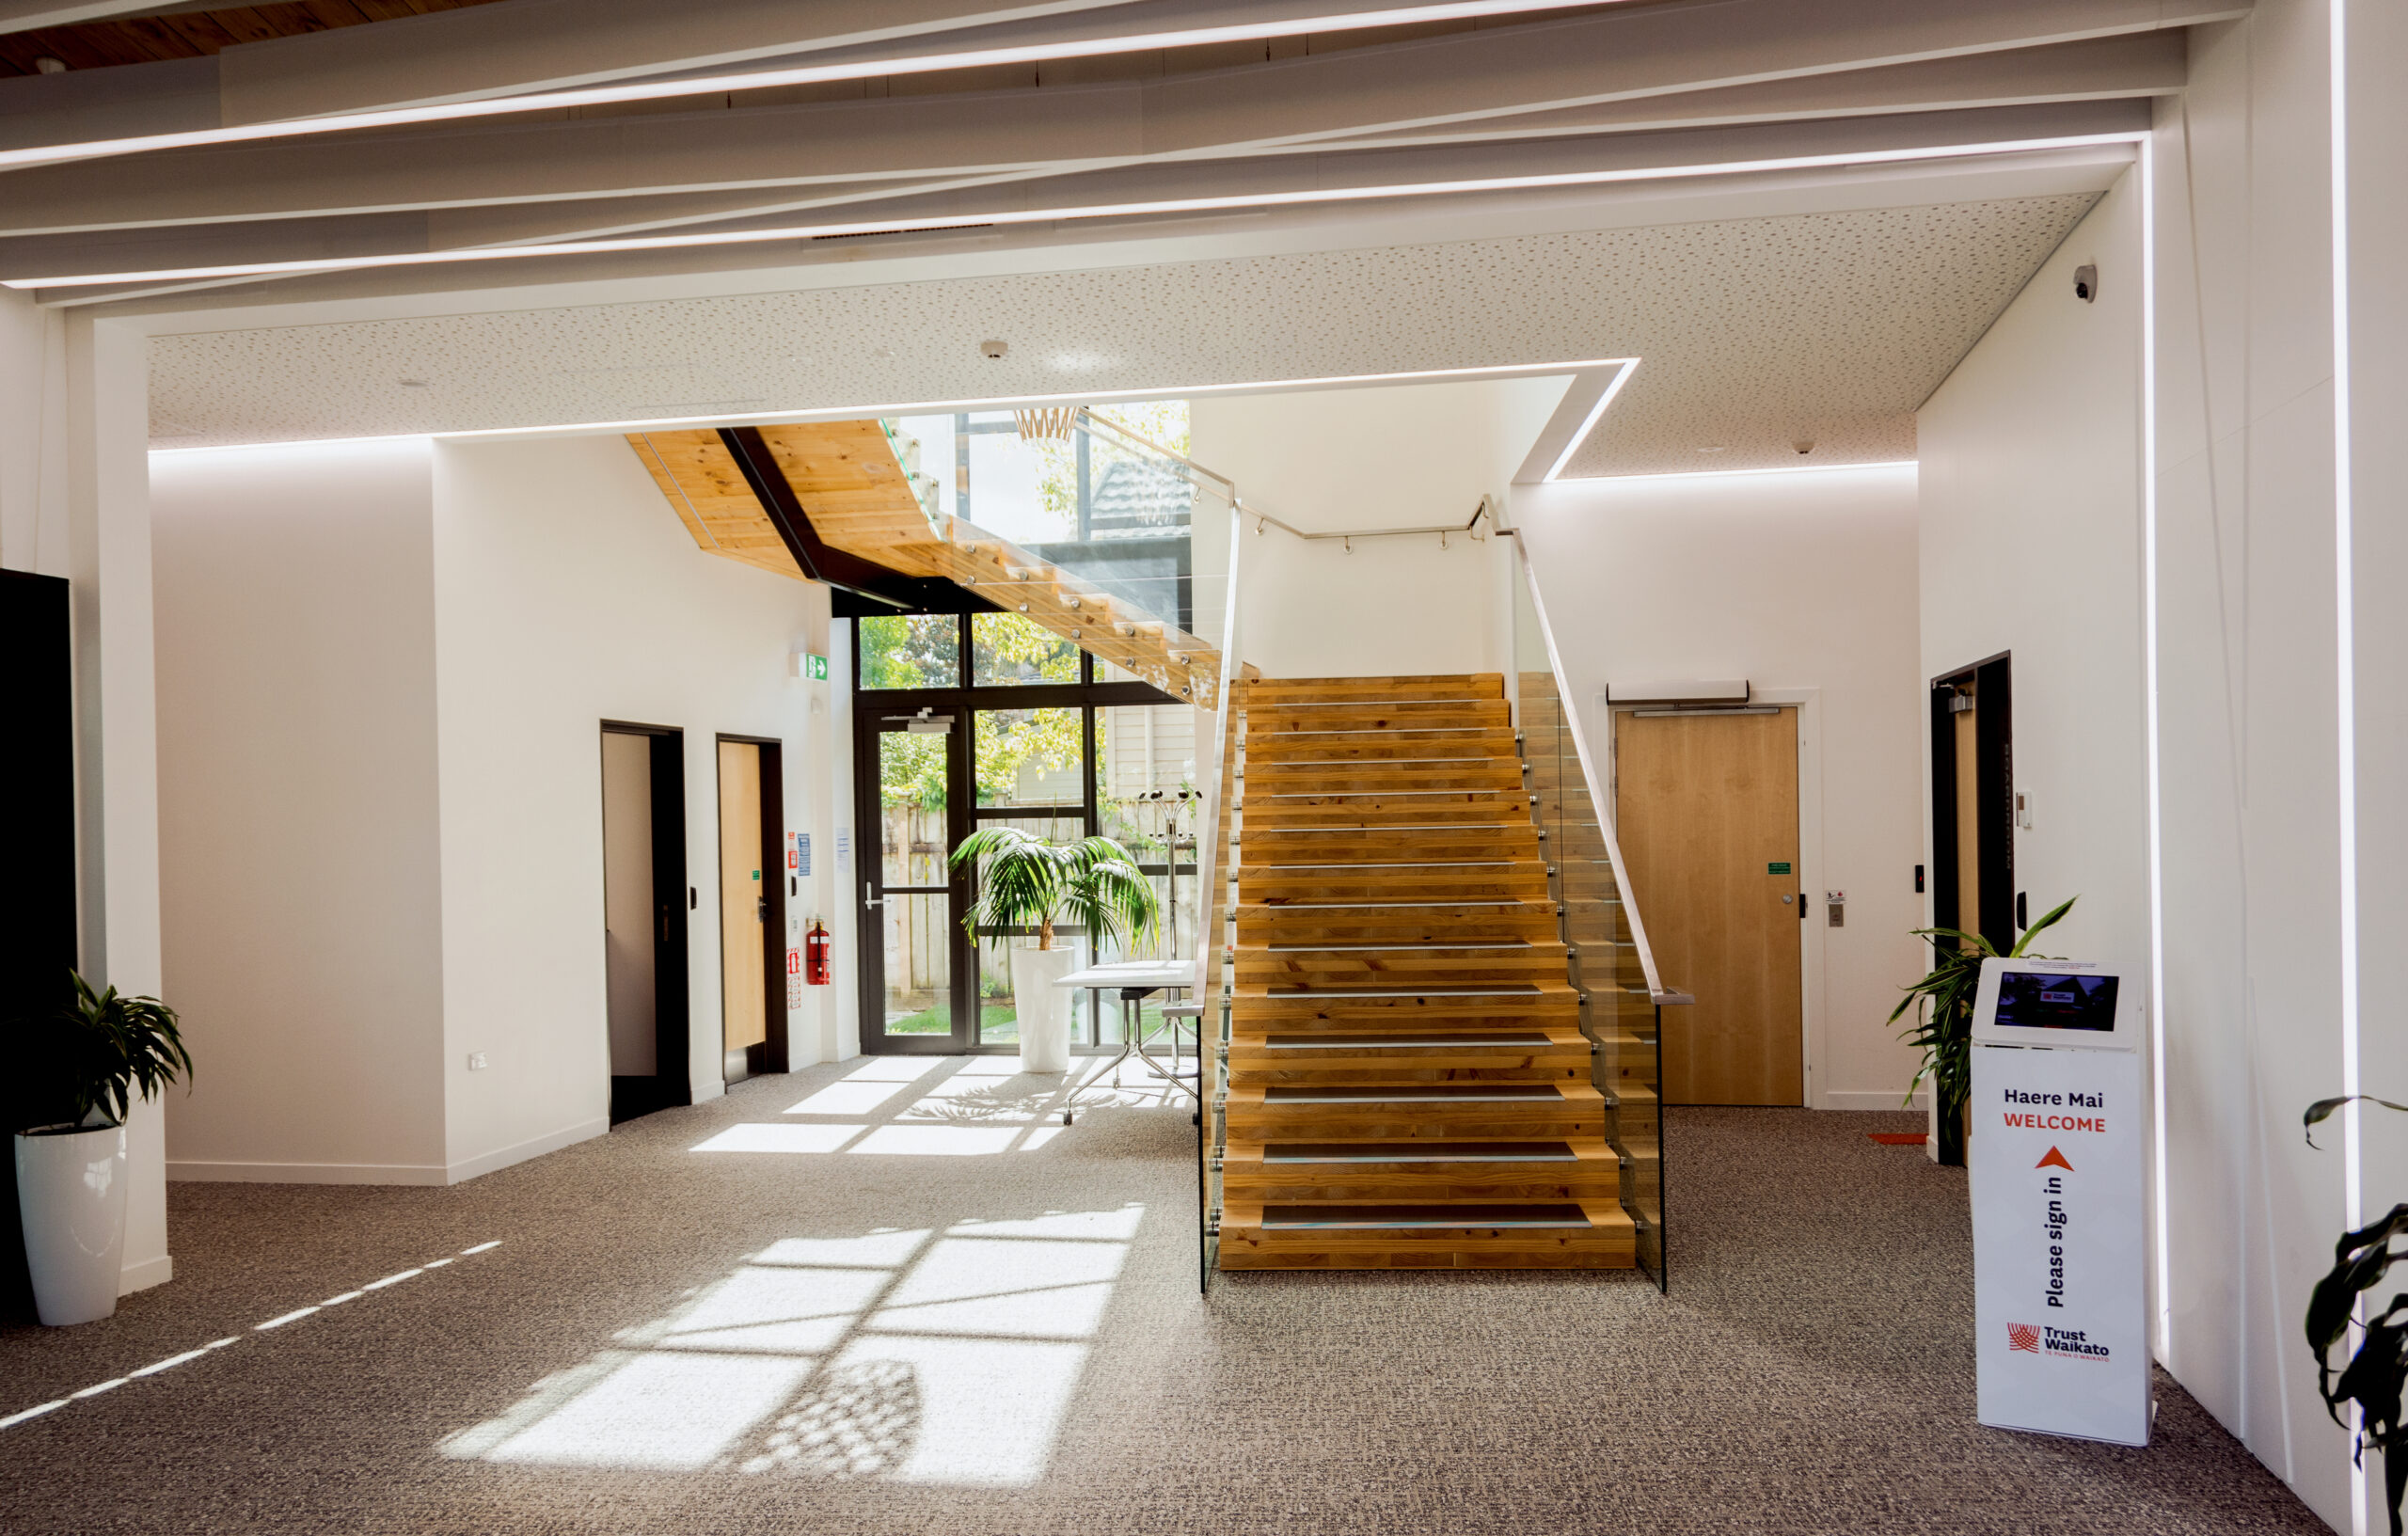 Foyer and stairs of the Trust Waikato office